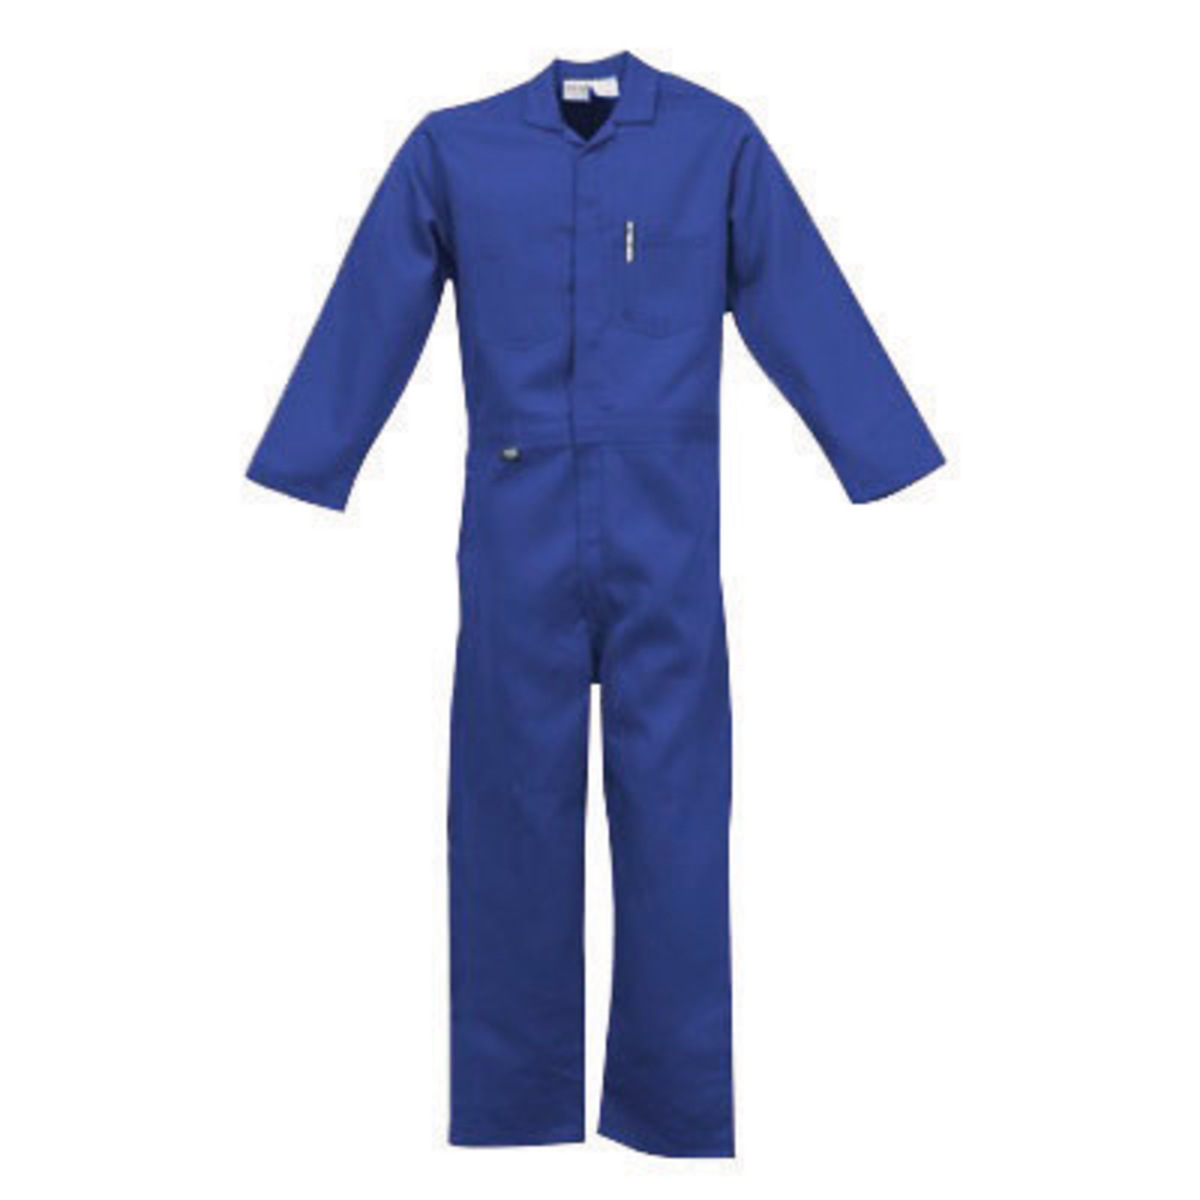 Stanco Safety Products™ Tall X-Large Royal Blue Nomex® IIIA Arc Rated Flame Resistant Coveralls With Front Zipper Closure And 1